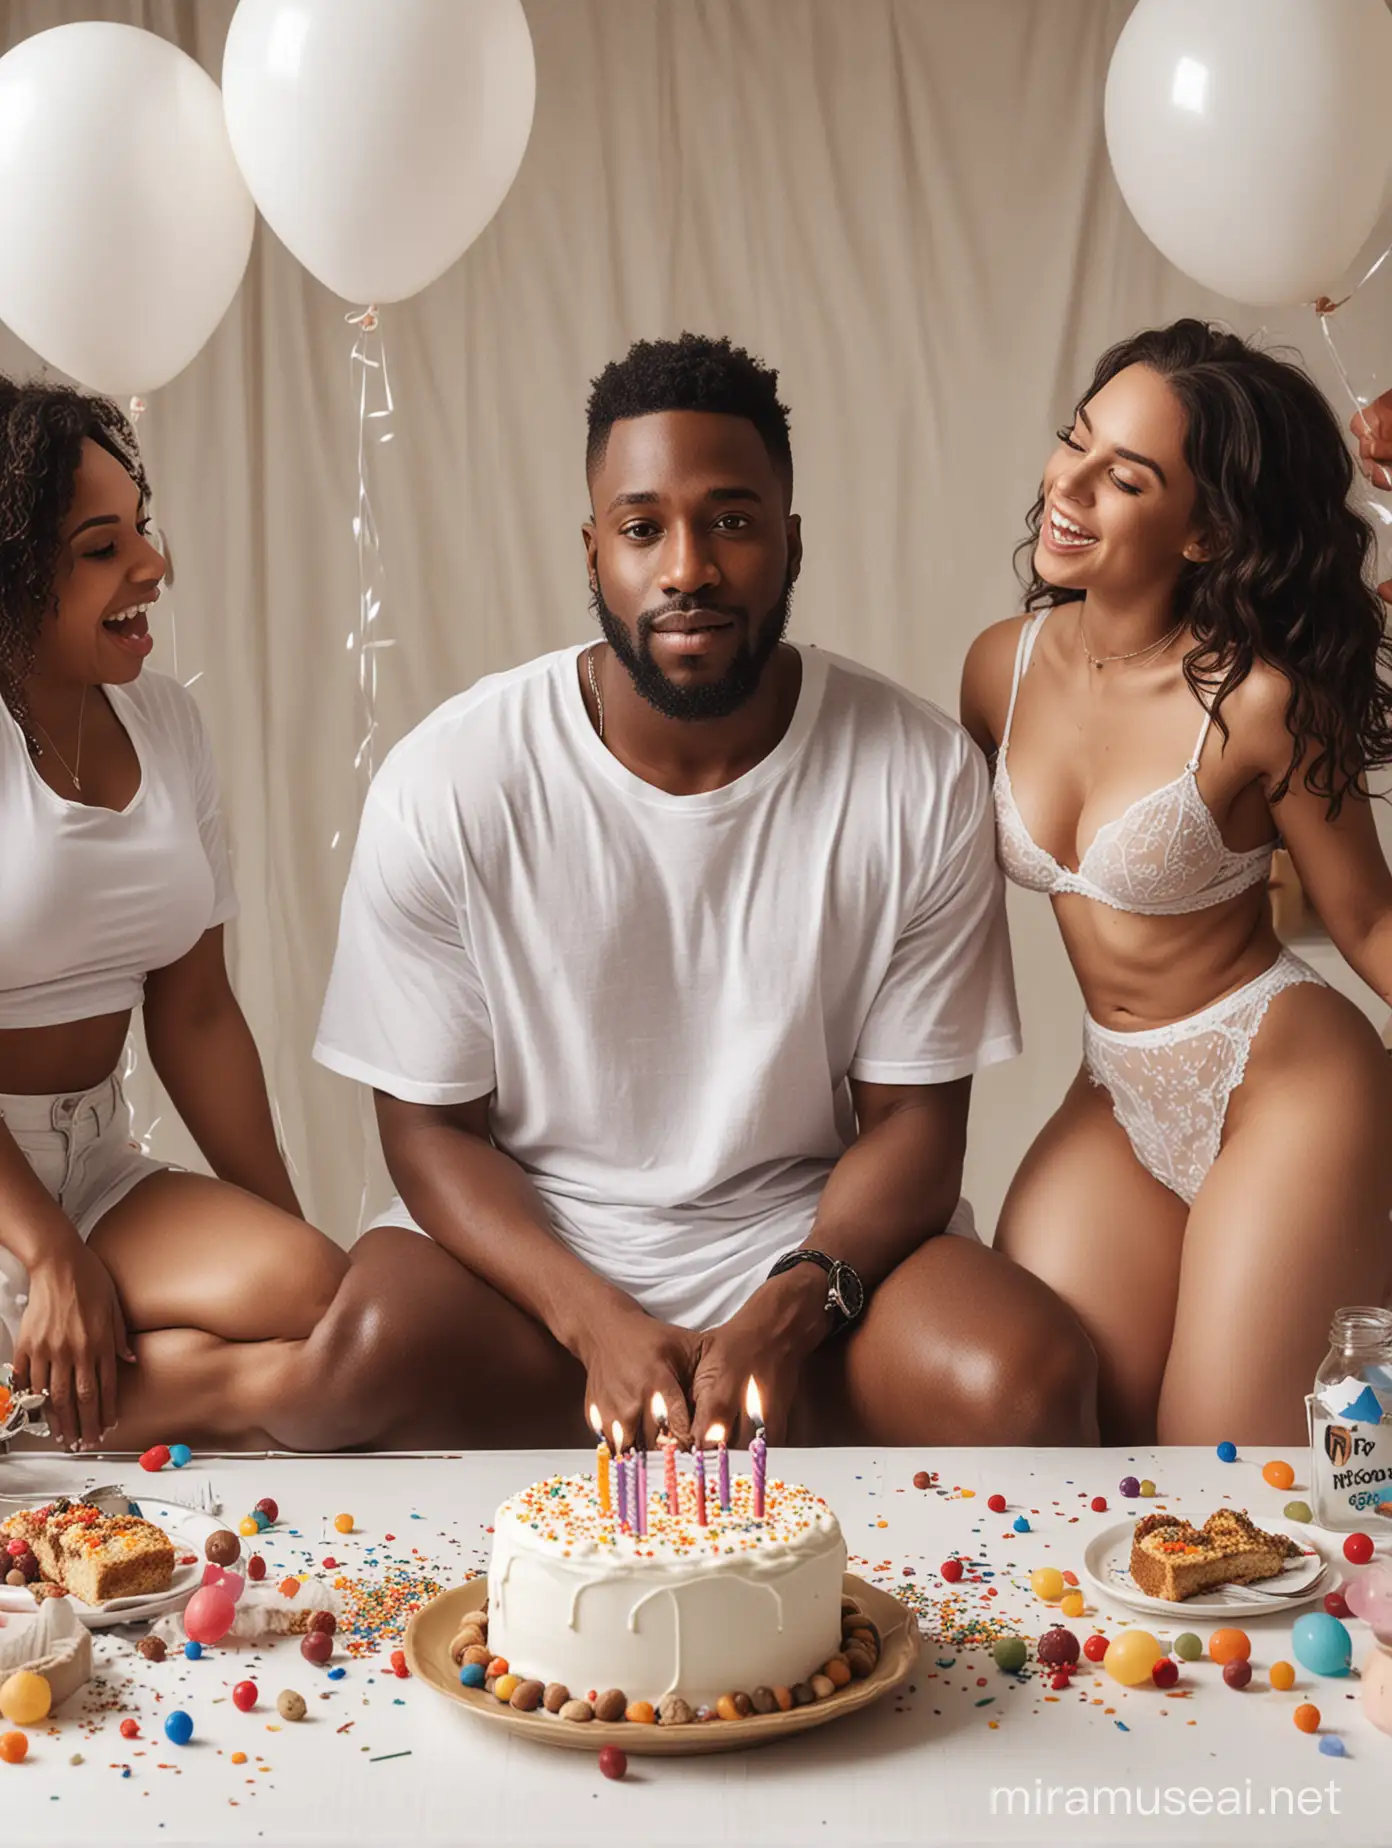 Birthday Celebration Black Man Surrounded by Nude Women at Table with Cake and Balloons